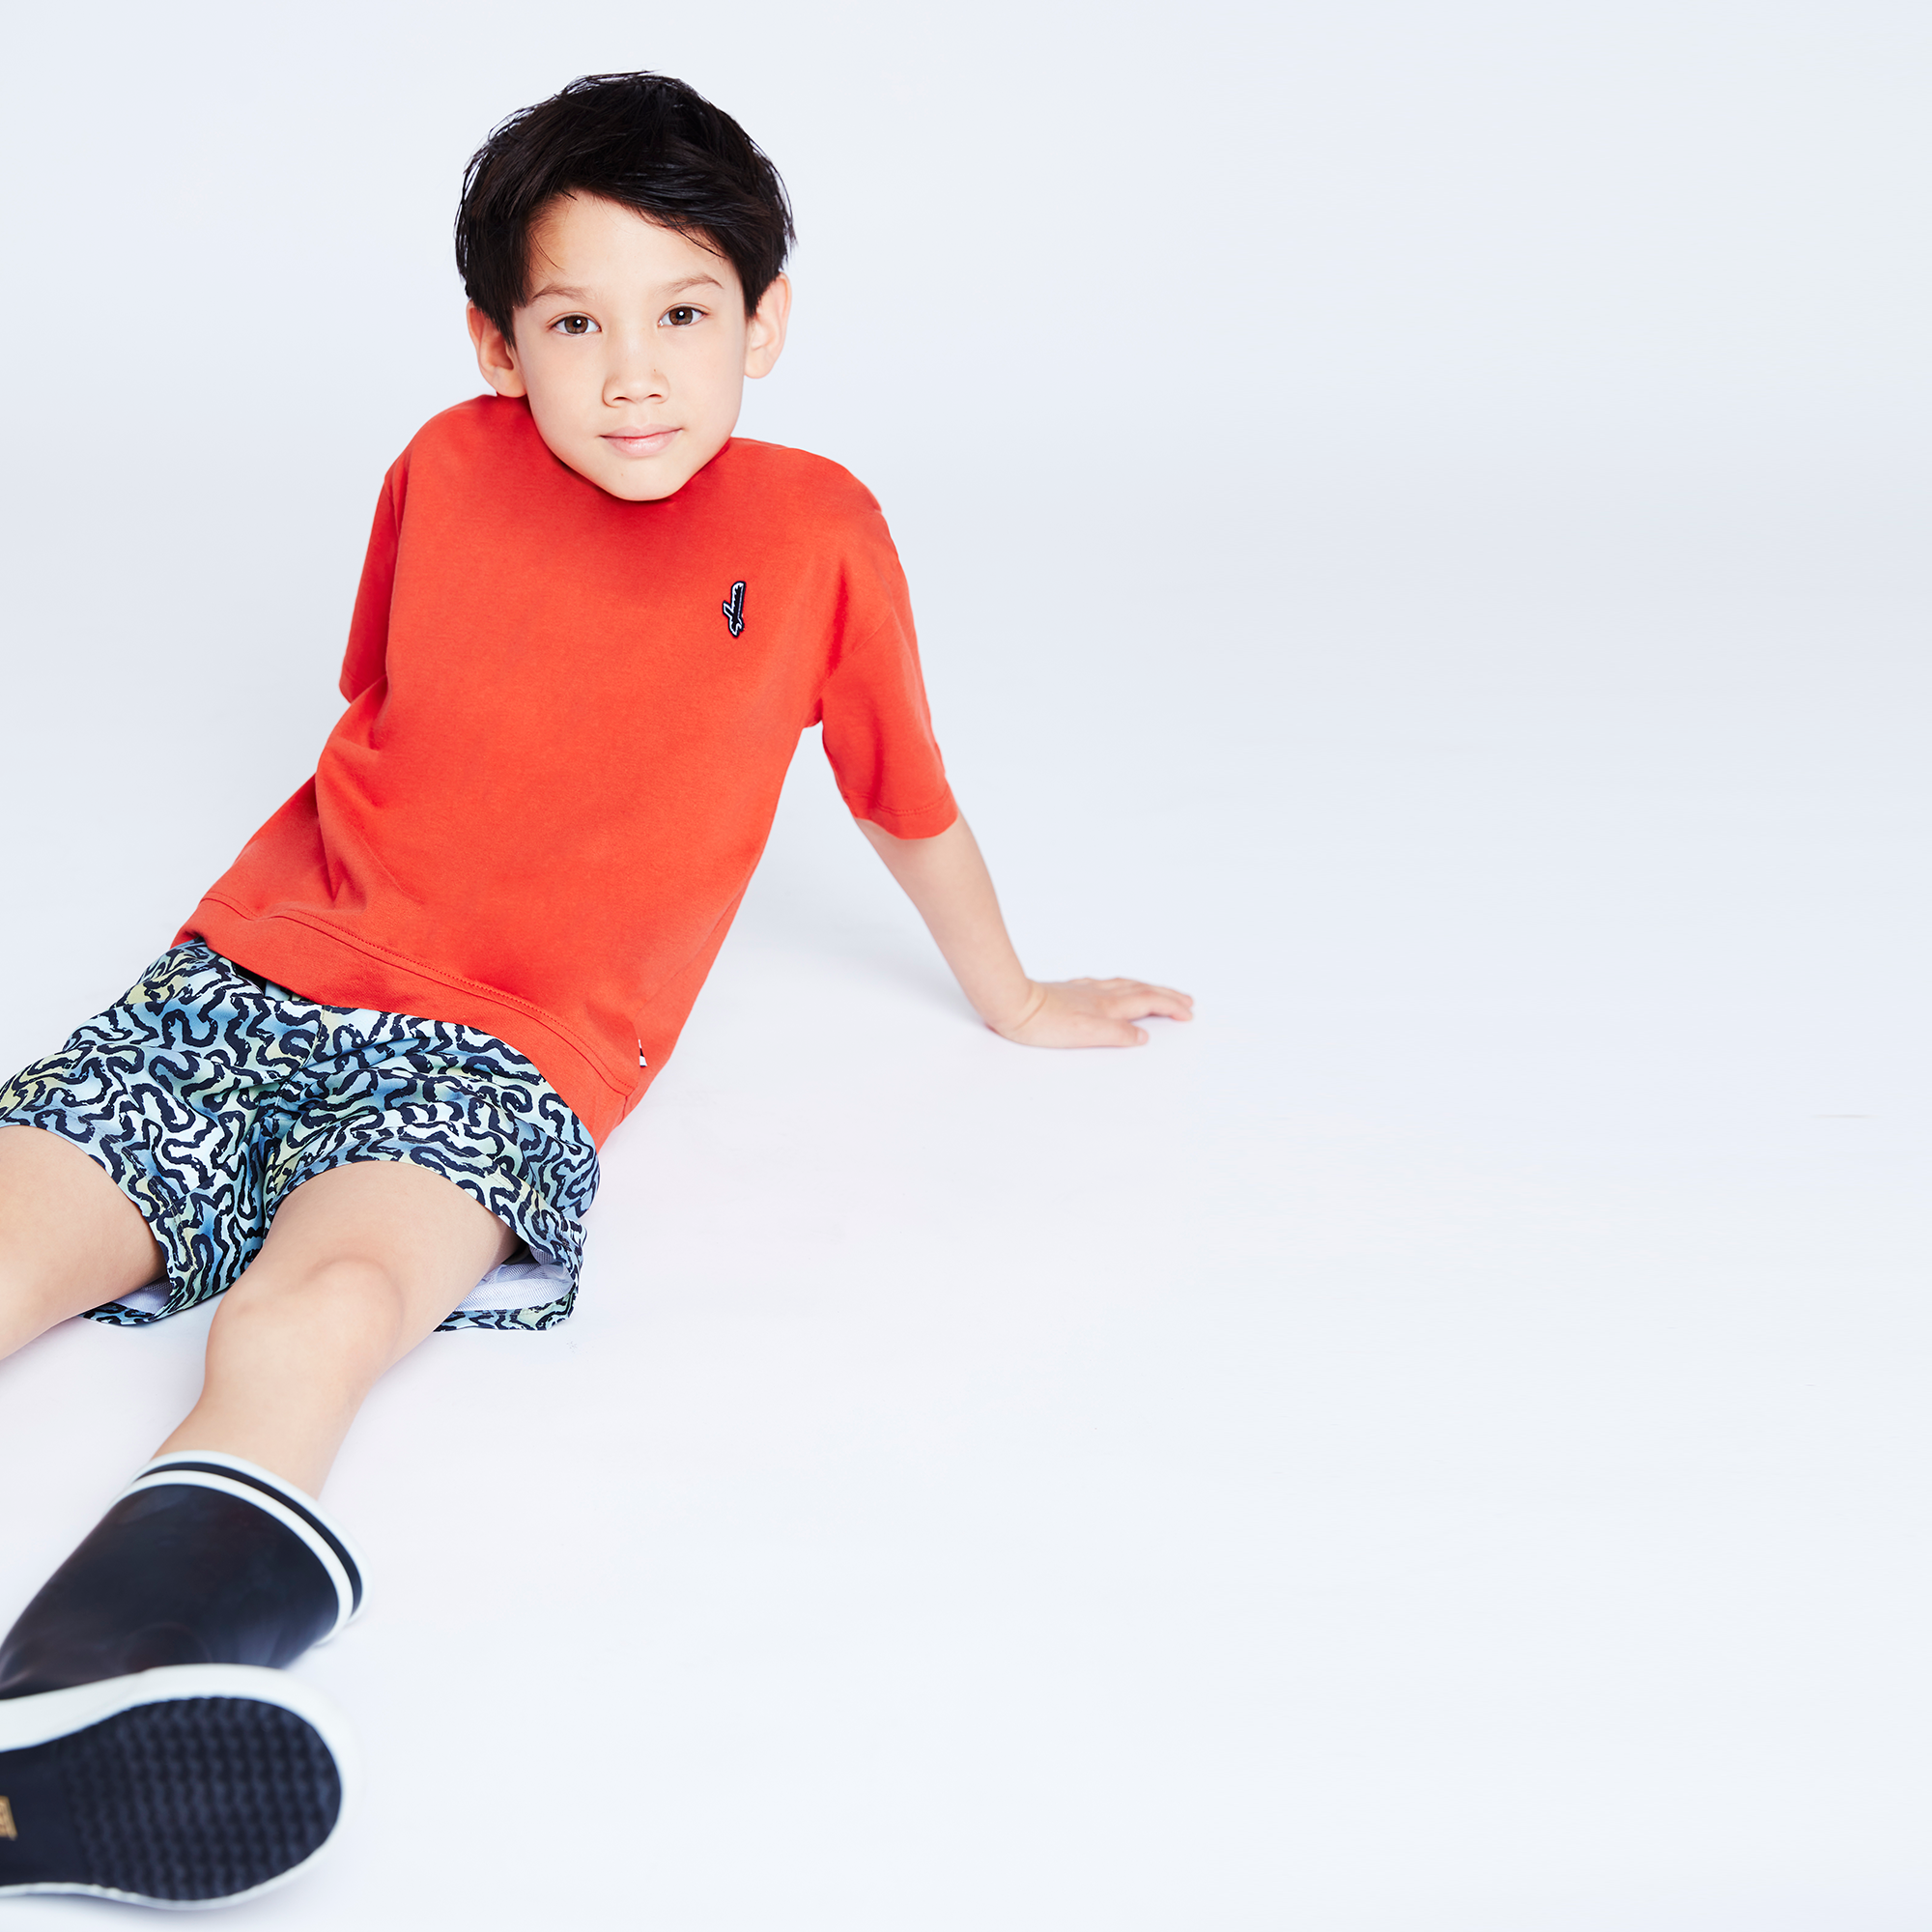 Printed swim shorts with patch AIGLE for BOY